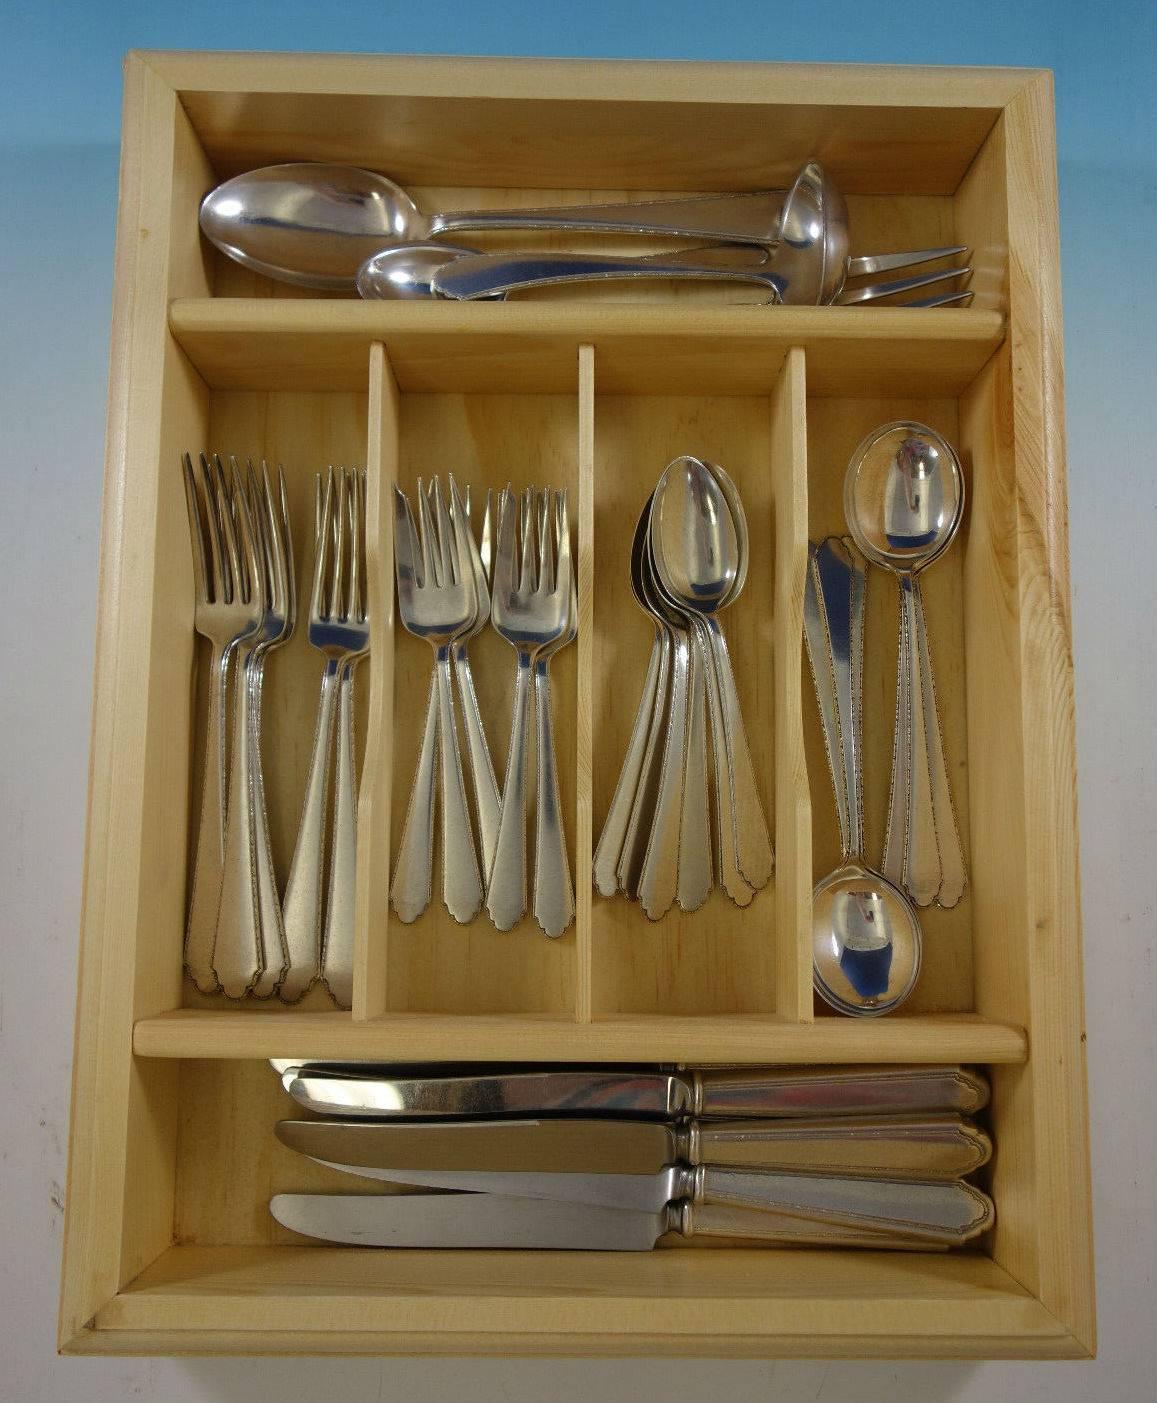 William and Mary by Lunt sterling silver flatware set, 34 pieces. Great starter set! This set includes: 

Six knives, 9